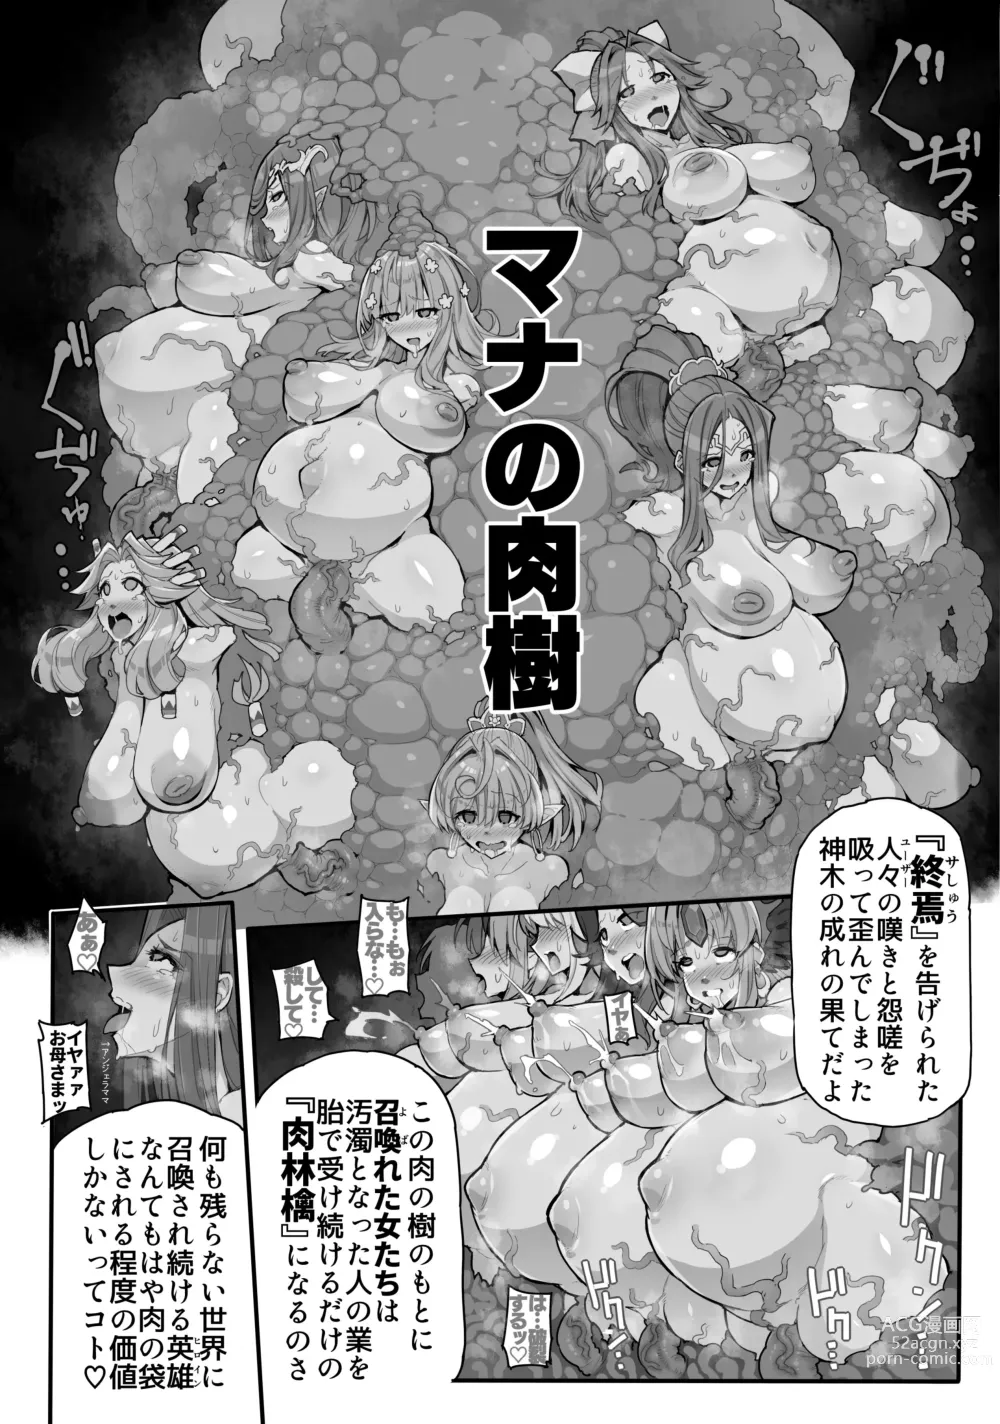 Page 20 of doujinshi Re Notice: End of App Service